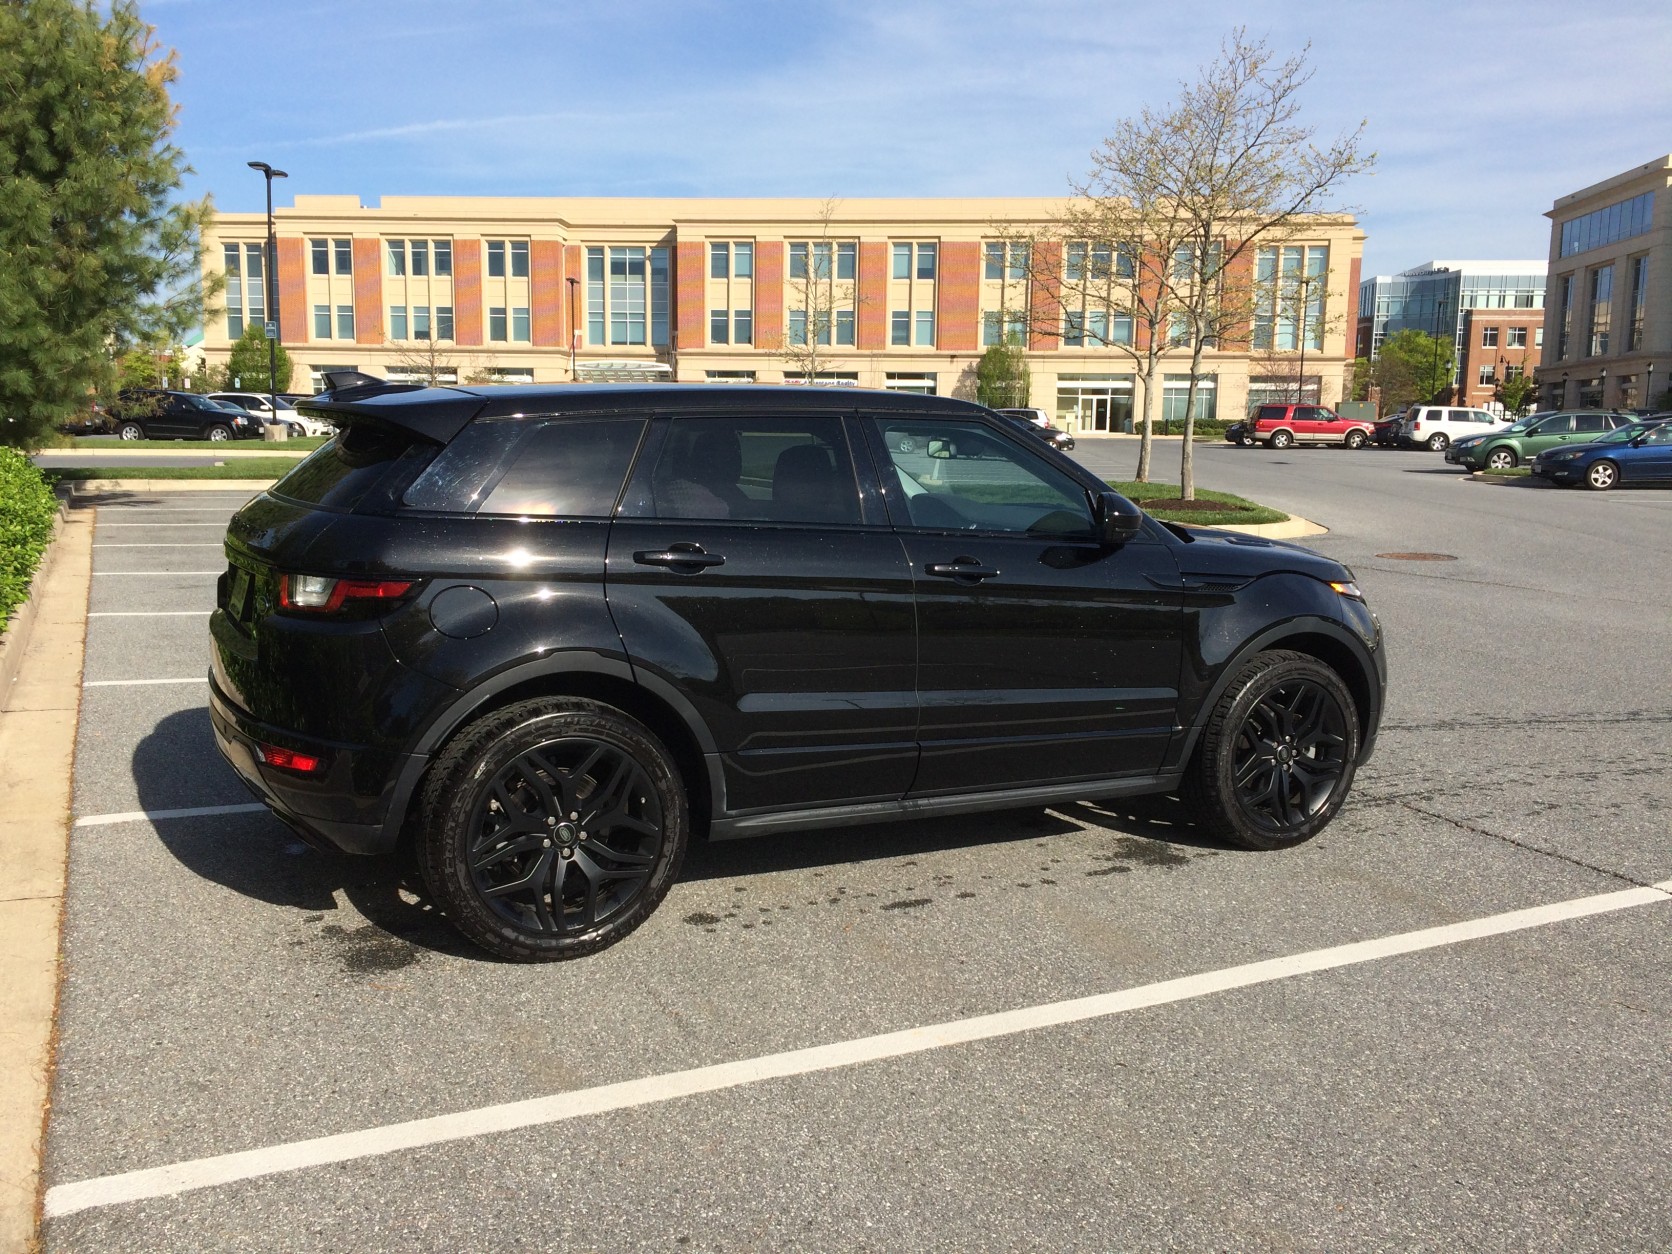 The 2016 Range Rover Evoque is a stylish small crossover. (WTOP/Mike Parris)